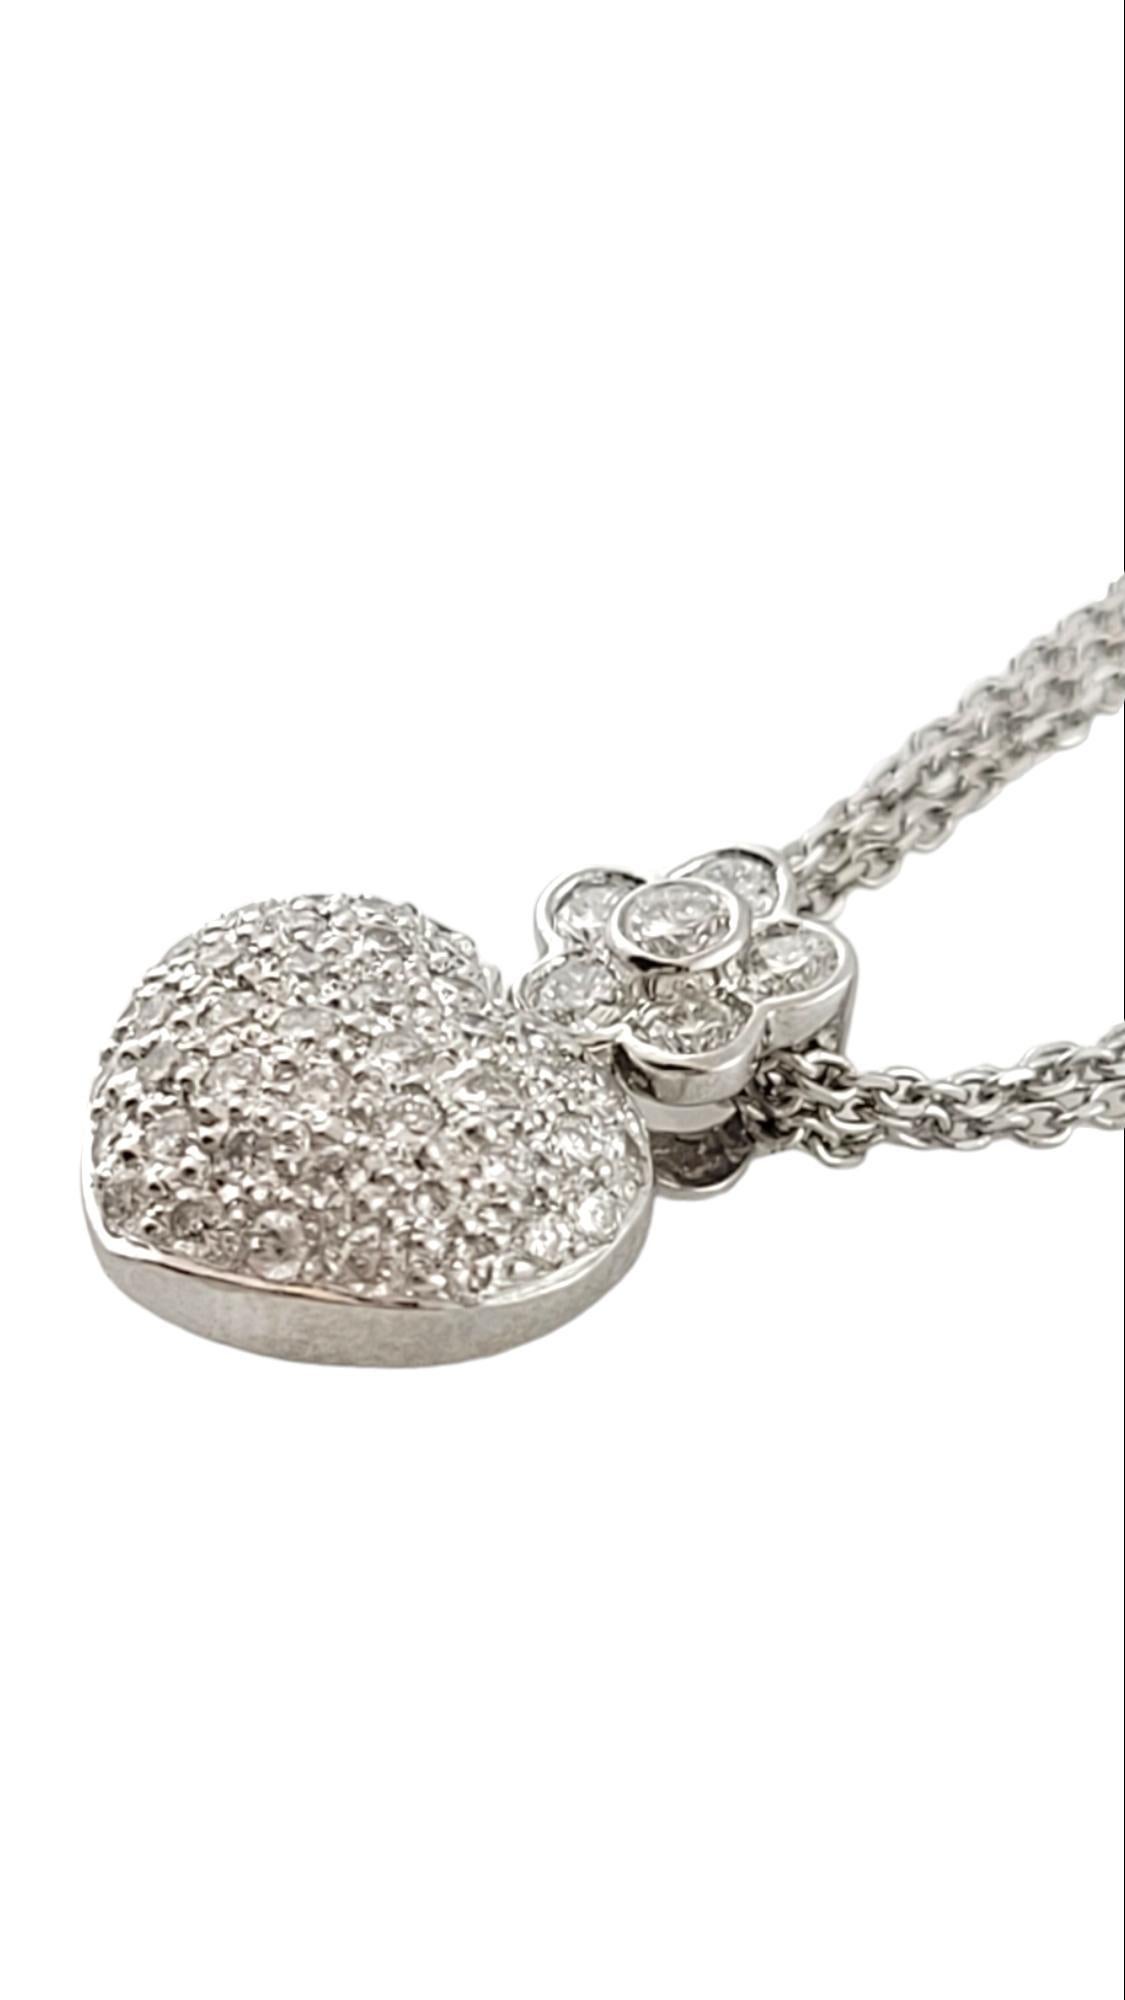 18K White Gold Diamond Heart Pendant w/ 14K White Gold Chain

This beautiful 14K white gold triple chain is paired with a gorgeous 18K gold heart and flower pendant with 51 sparkling round brilliant cut diamonds!

Approximate total diamond weight: